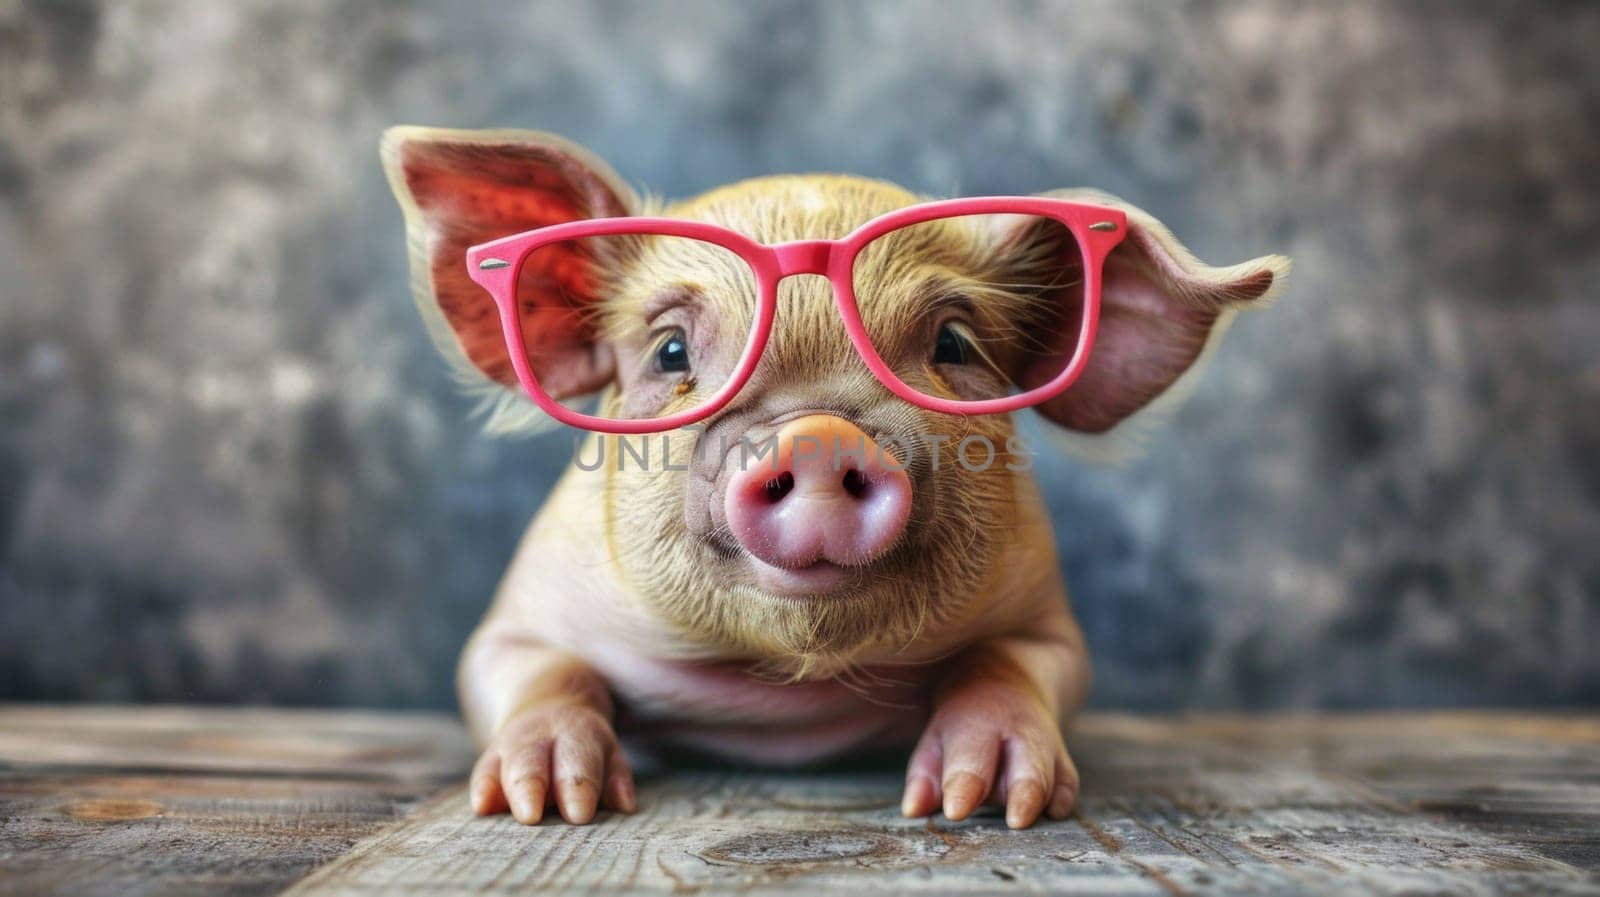 A pig wearing pink glasses sitting on a wooden table